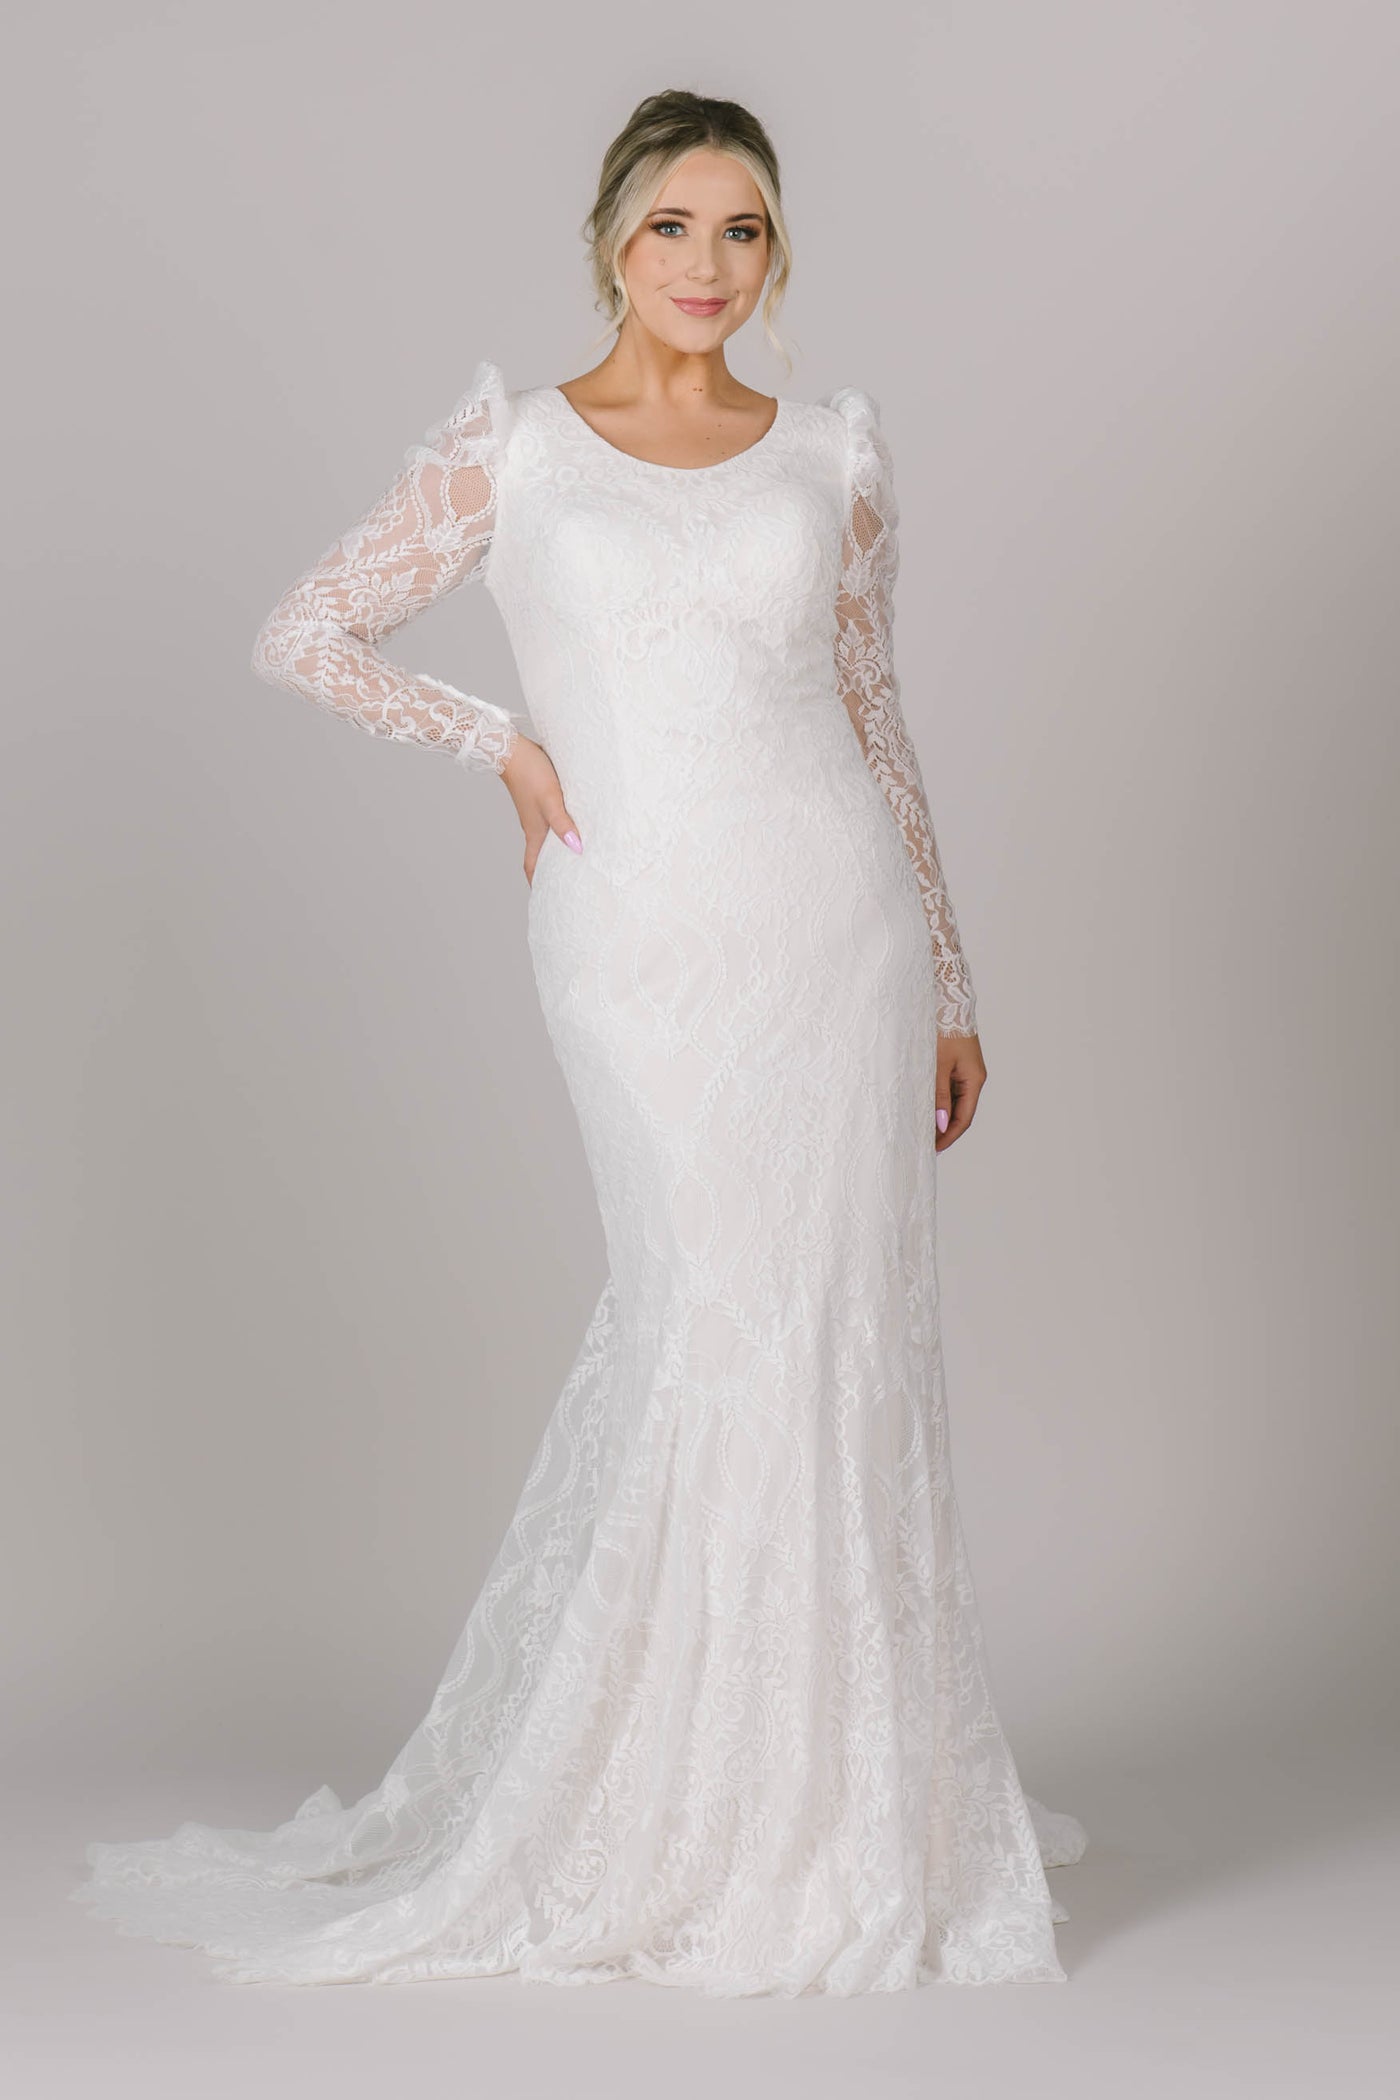 A front angle of a modest wedding dress that features a fitted silhouette, scoop neck, and the most perfect long sleeves. The lace on this gown is stunning!